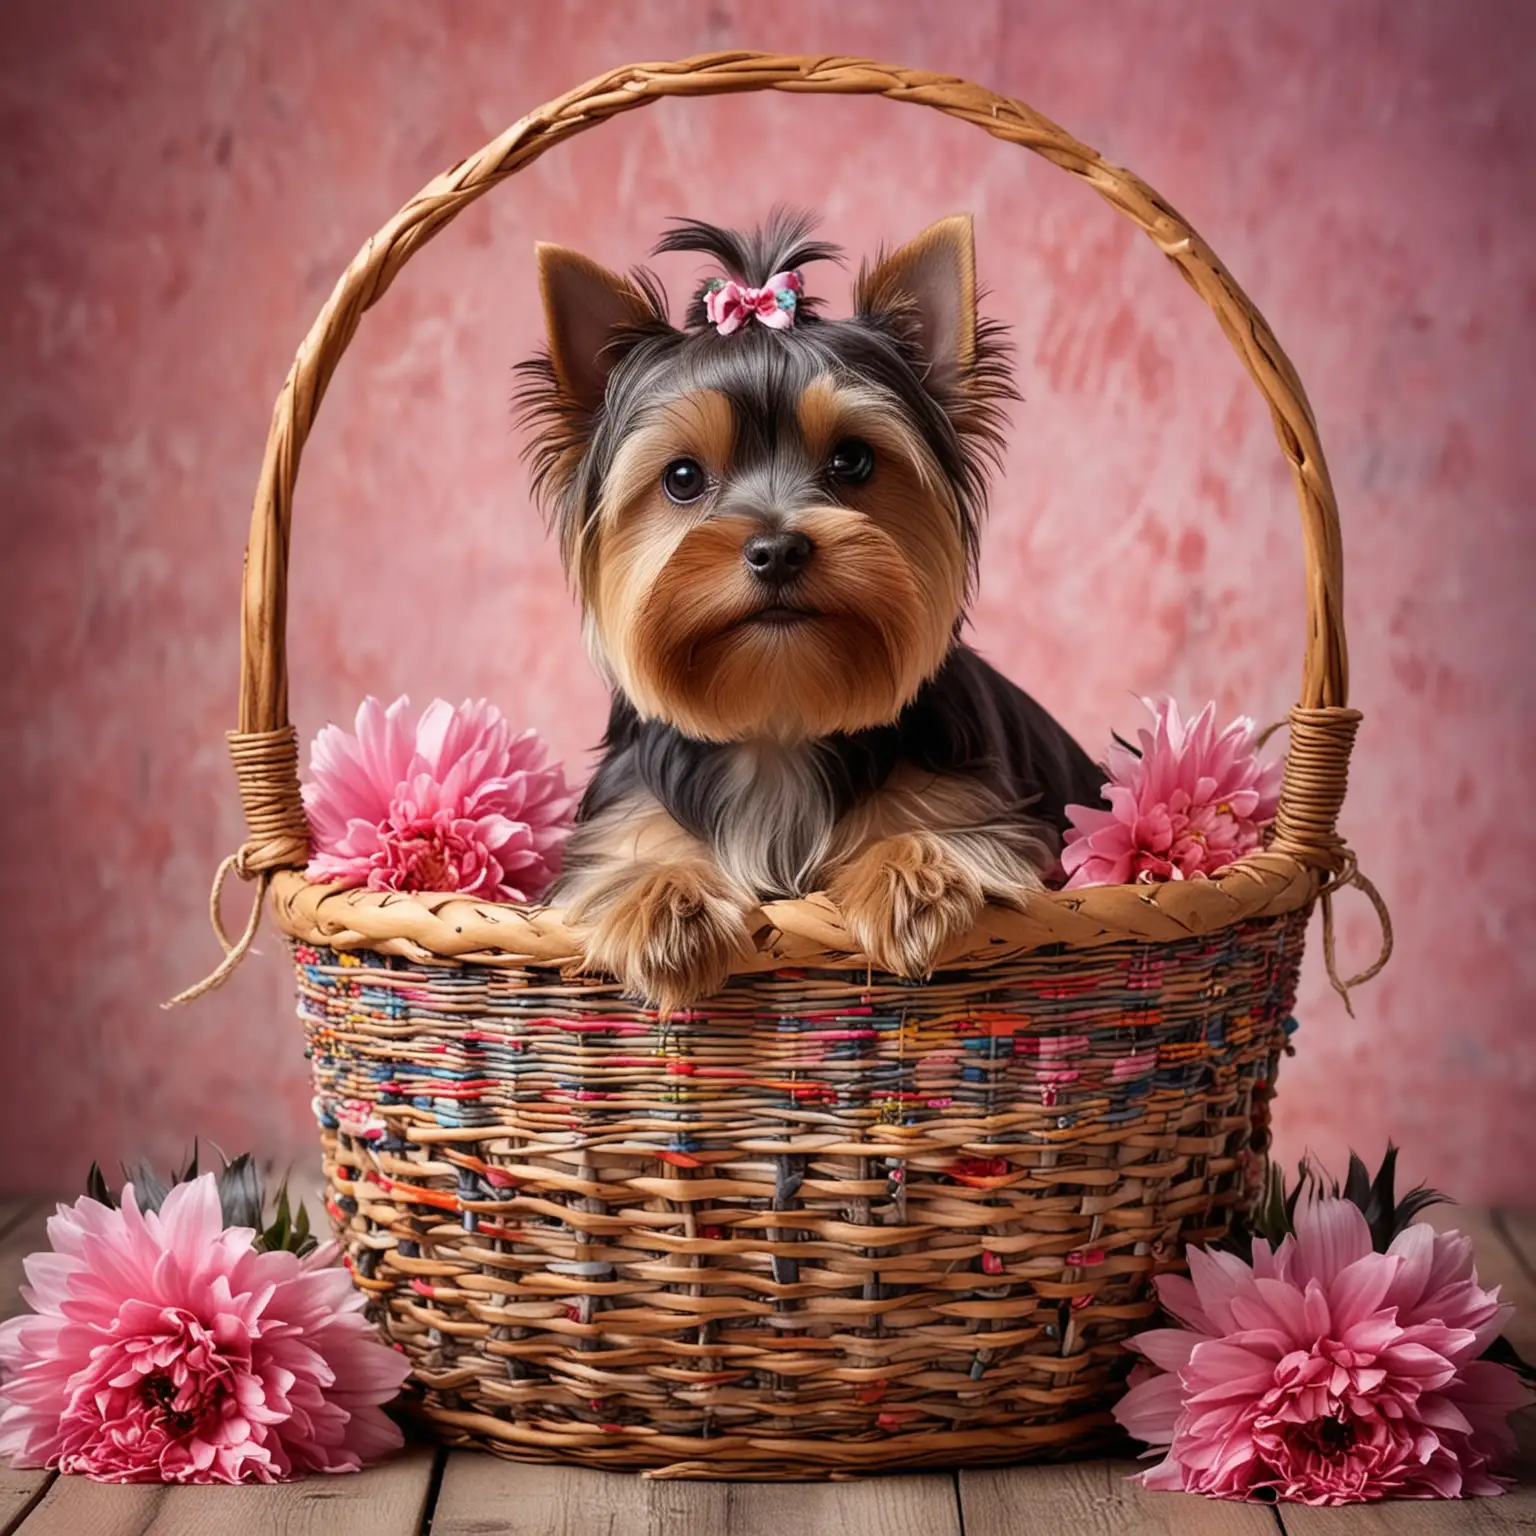 Beautifully Groomed Yorkshire Terrier Sitting in Decorated Basket